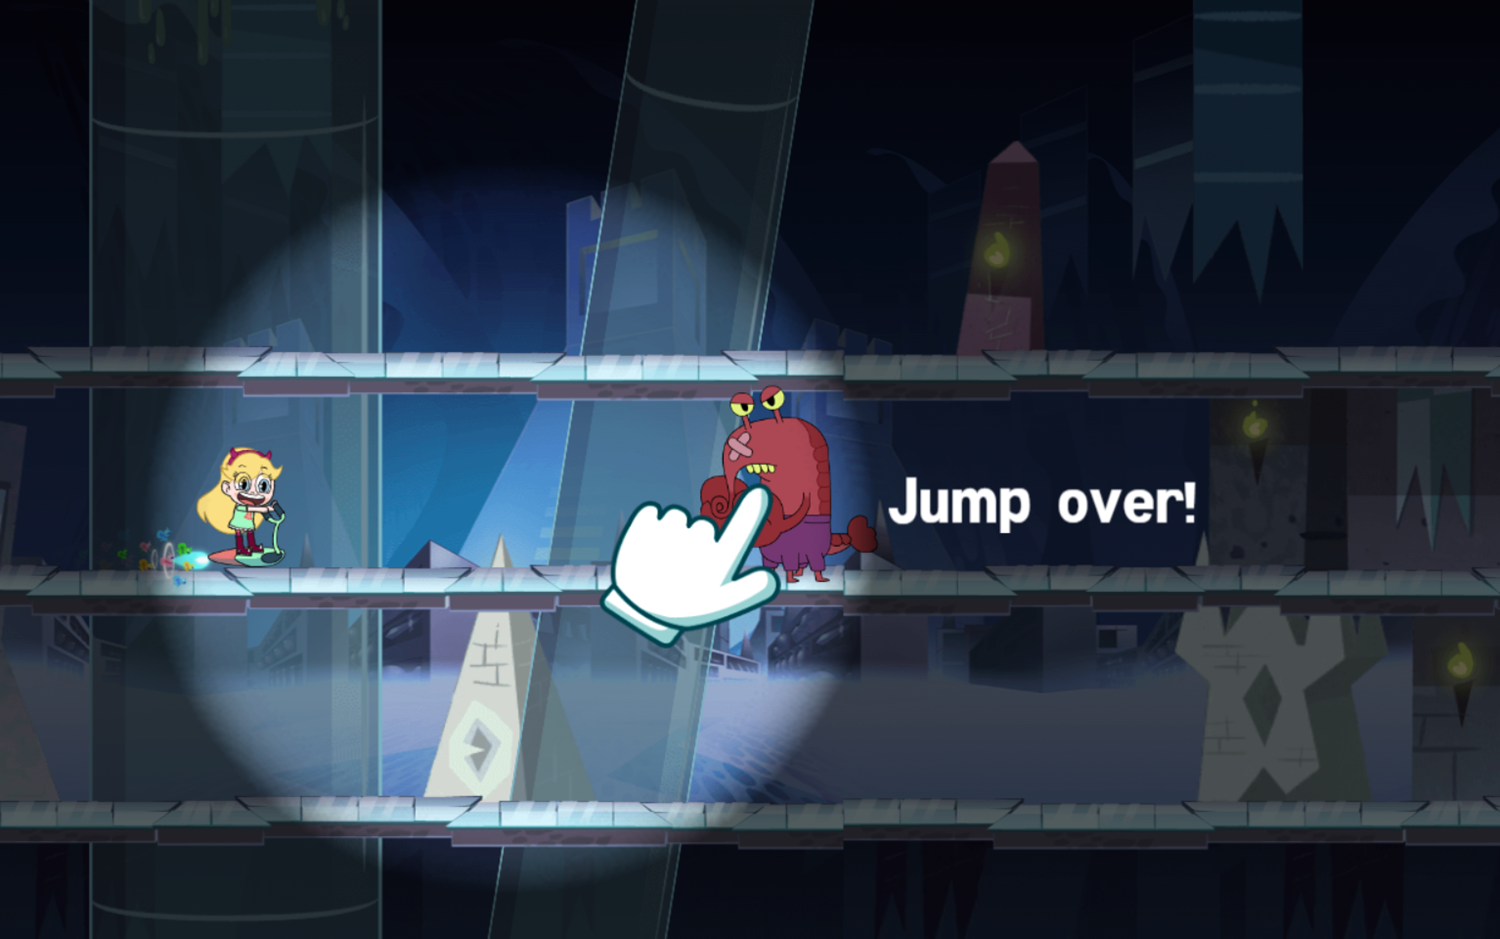 Star vs the Forces of Evil Quest Buy Rush Game How To Jump Over Screenshot.